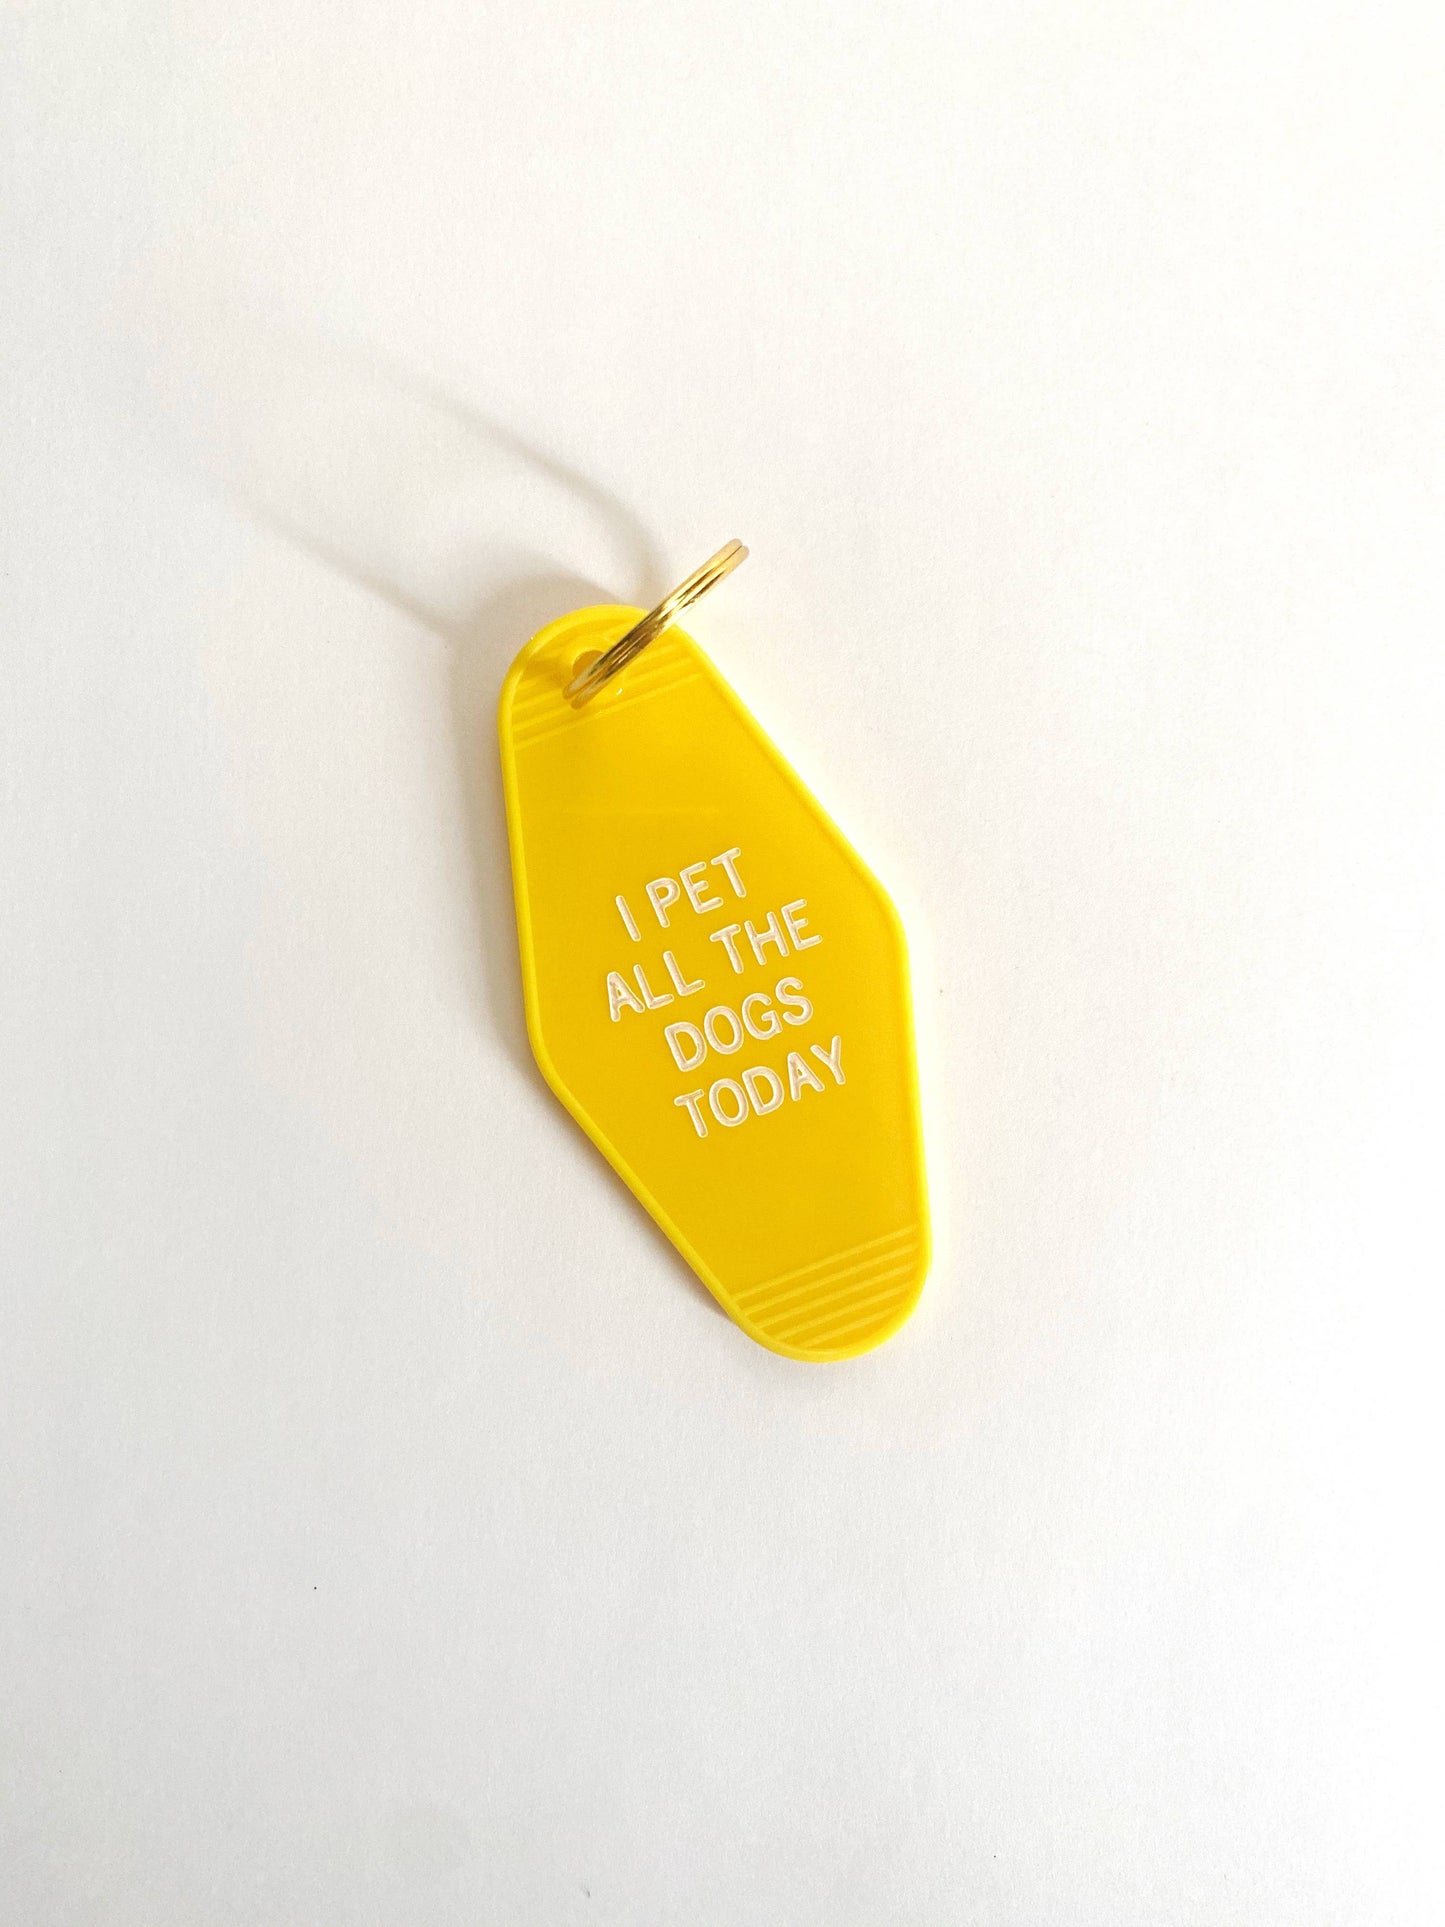 I Pet All the Dogs Today -  Motel Style Keychain